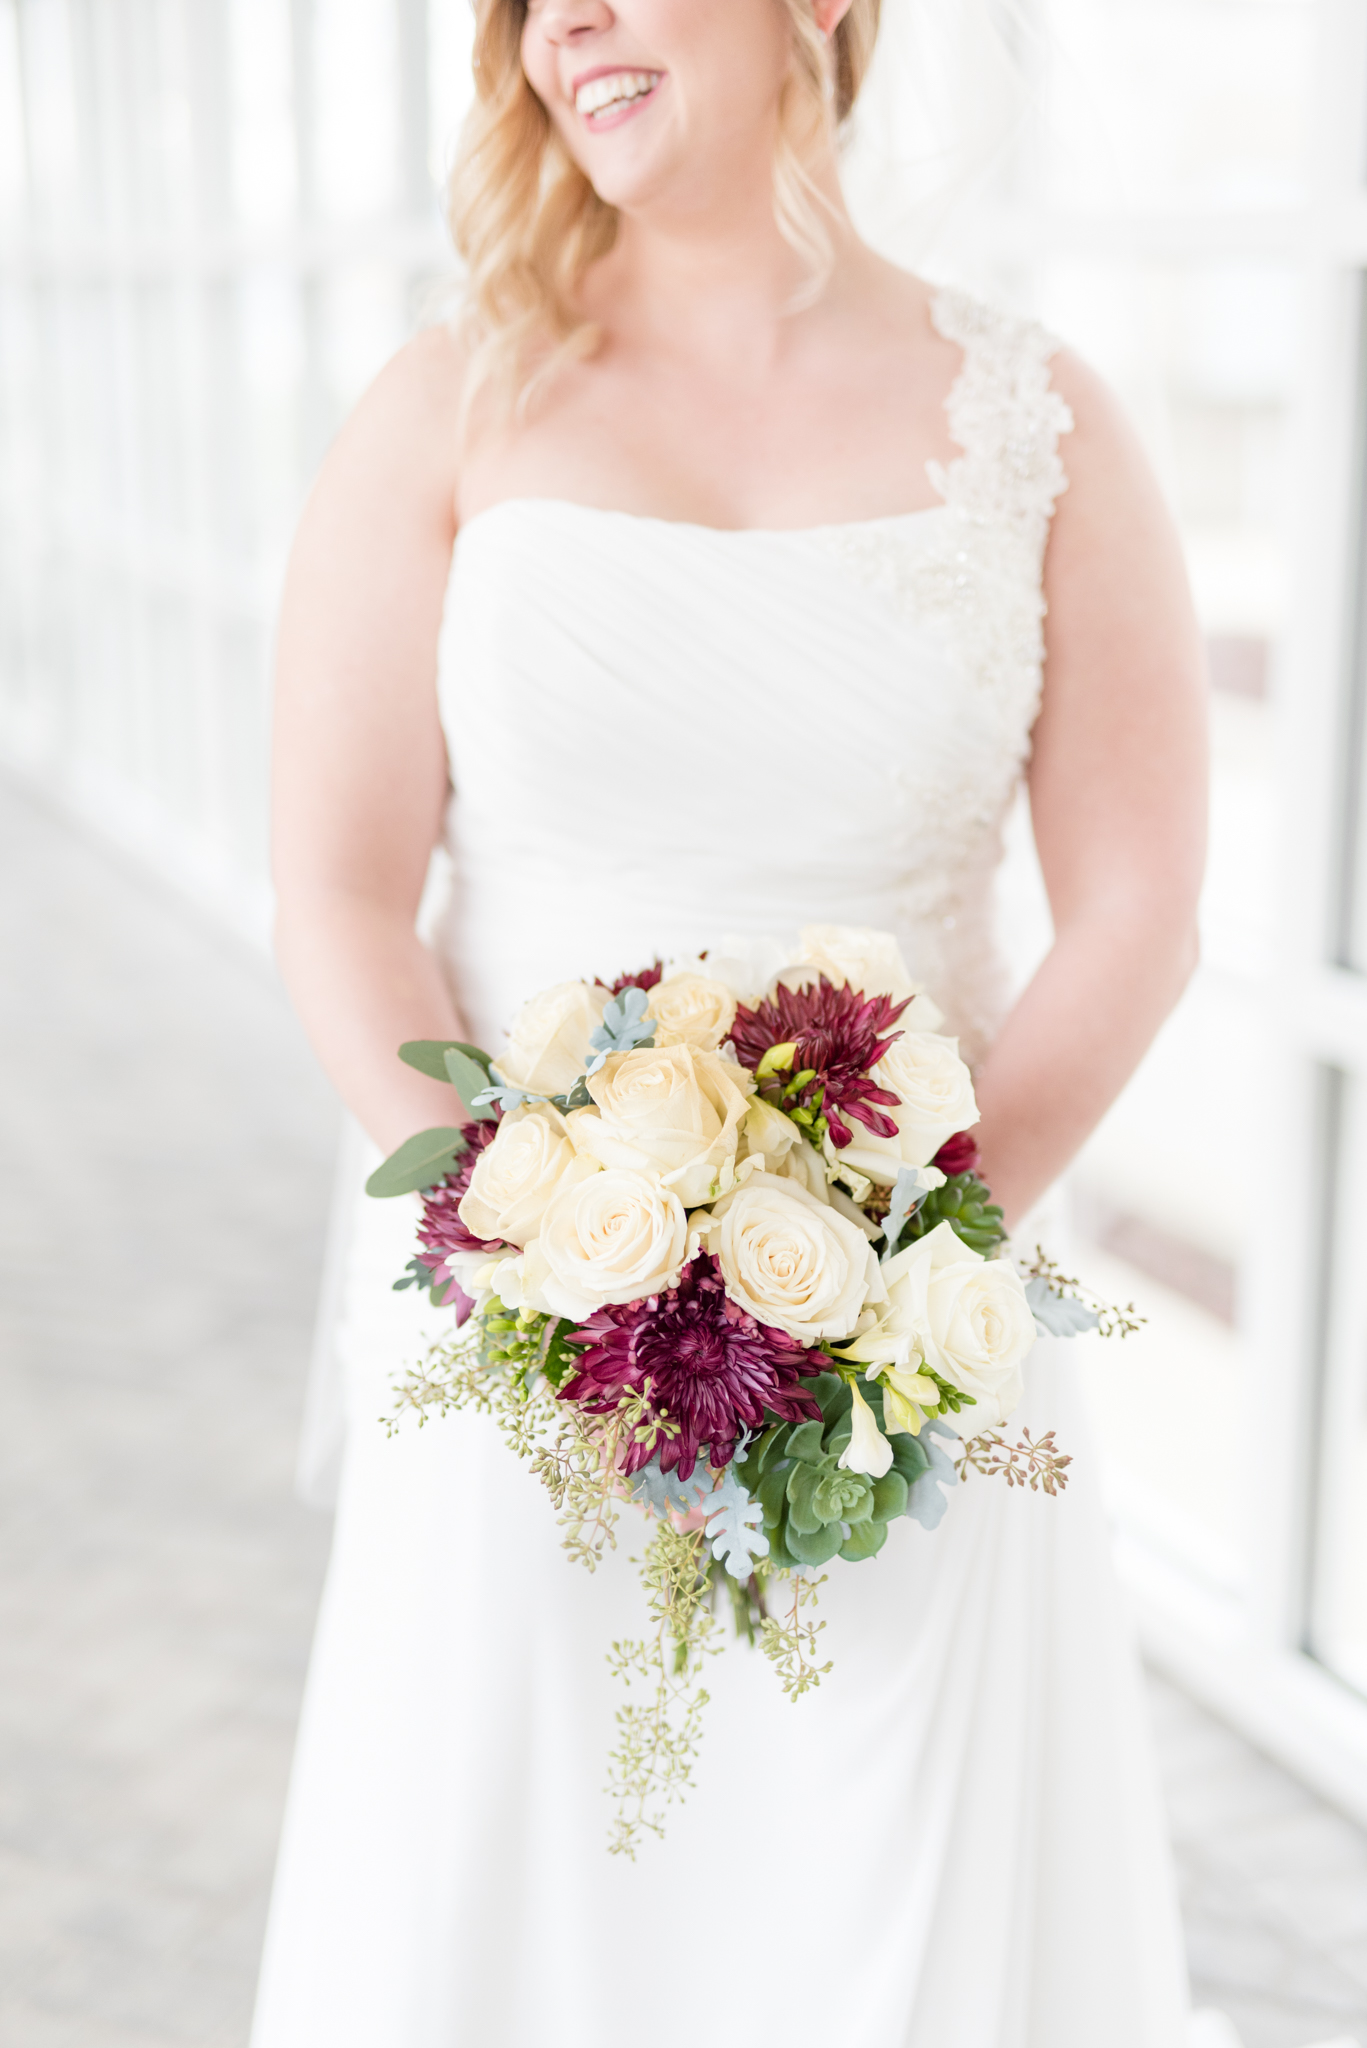 Bride holds bouquet and smiles.